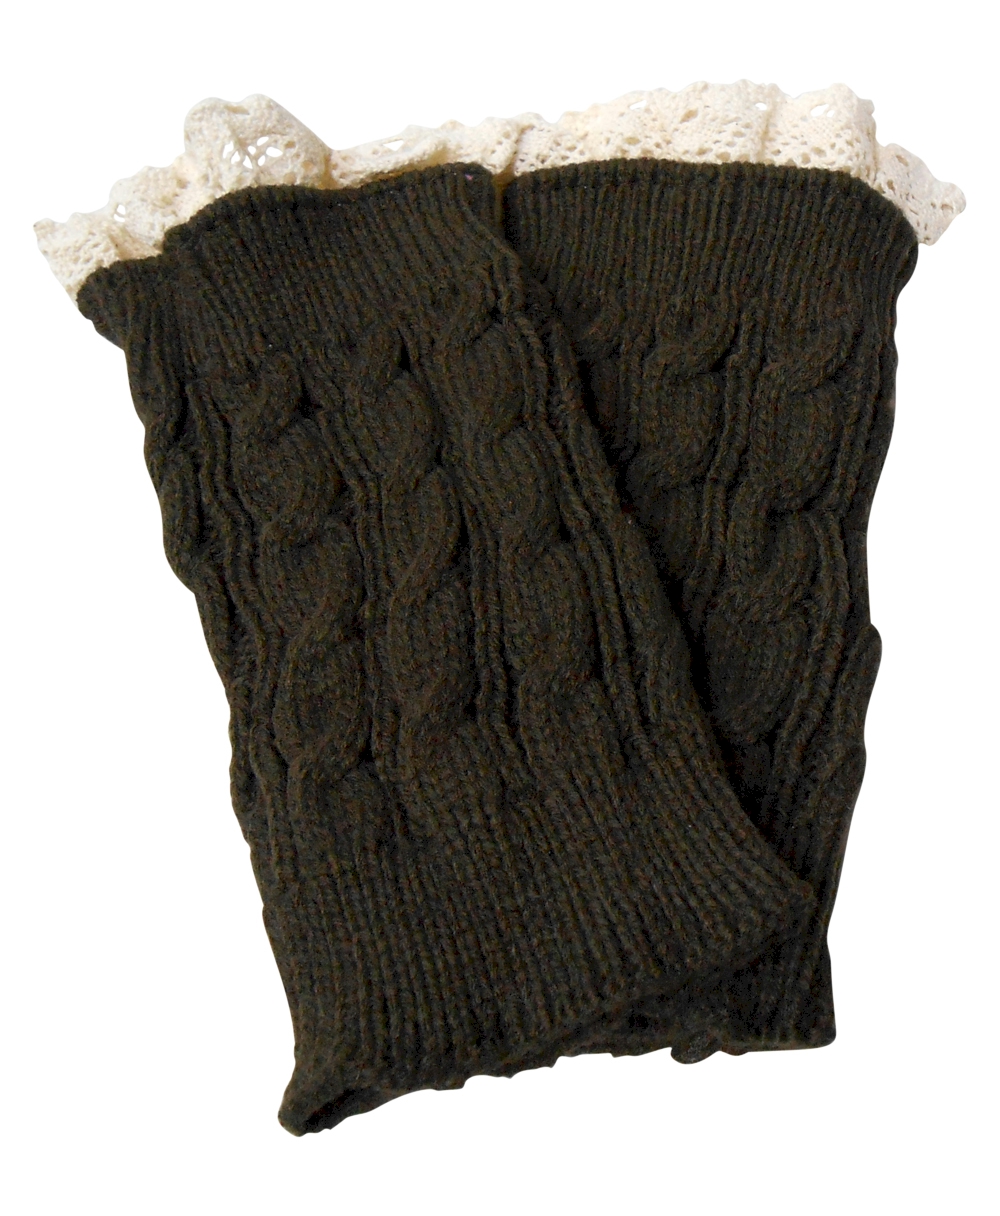 Cable Knit Boot Cuff with Lace Top - DARK BROWN - CLOSEOUT